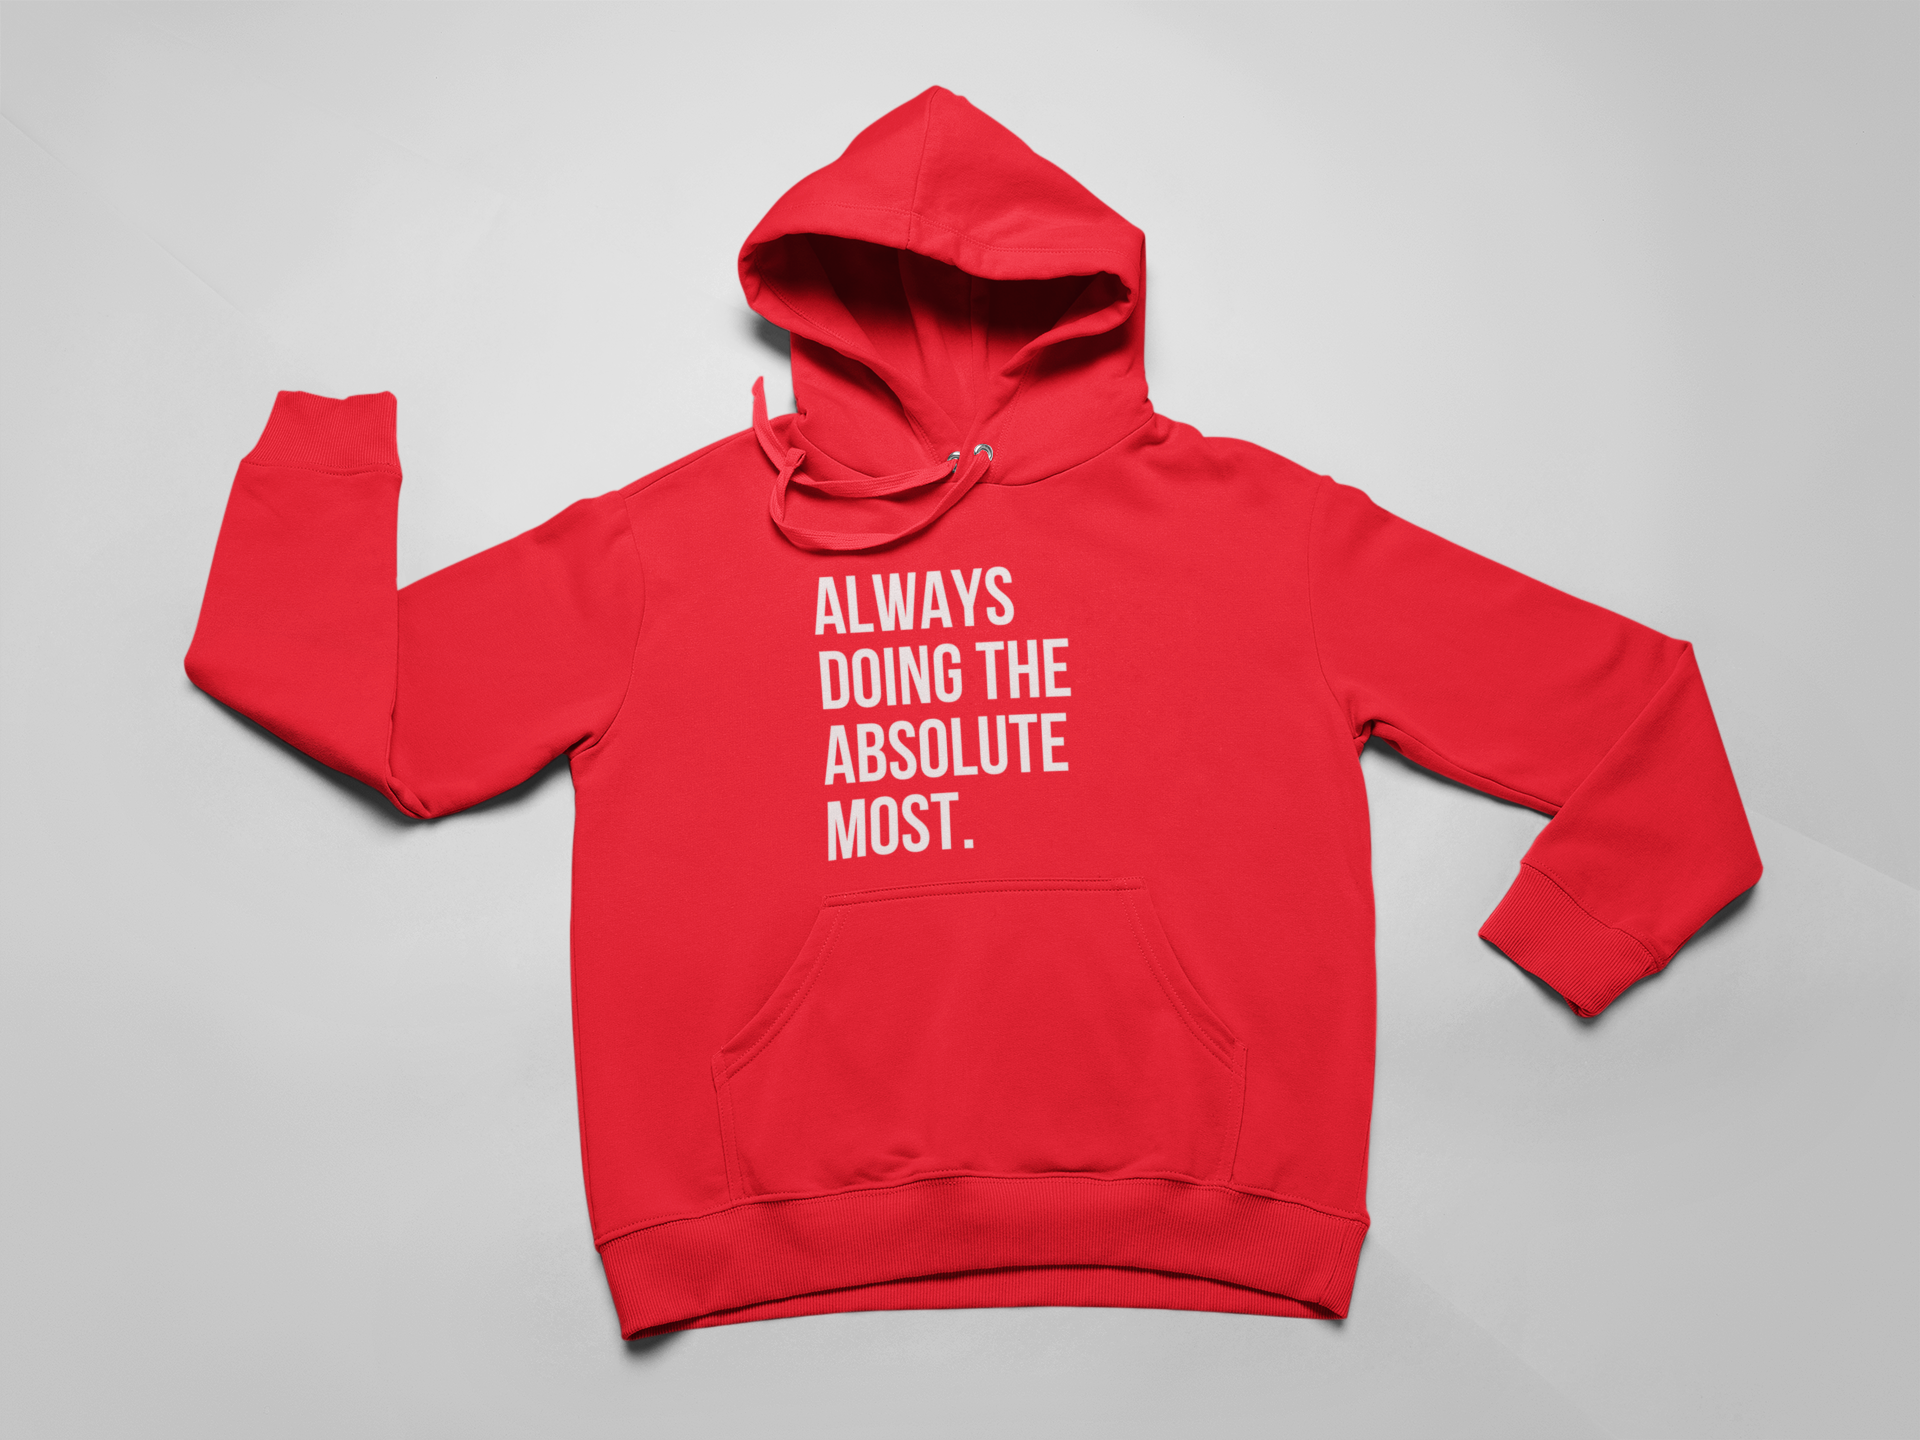 The Most Hoodie